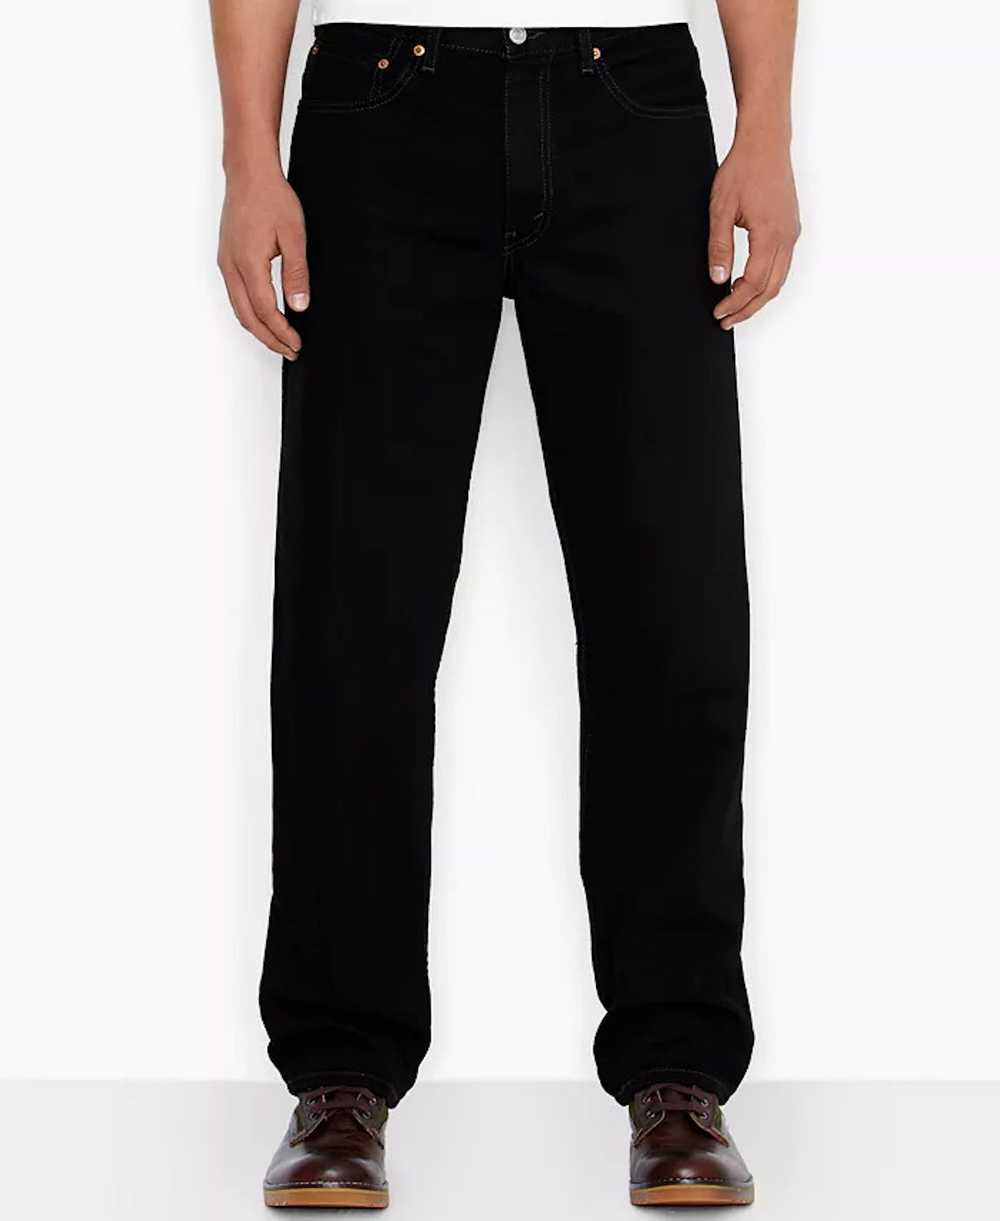 Levi's 550 Relaxed Fit Jeans - image 6